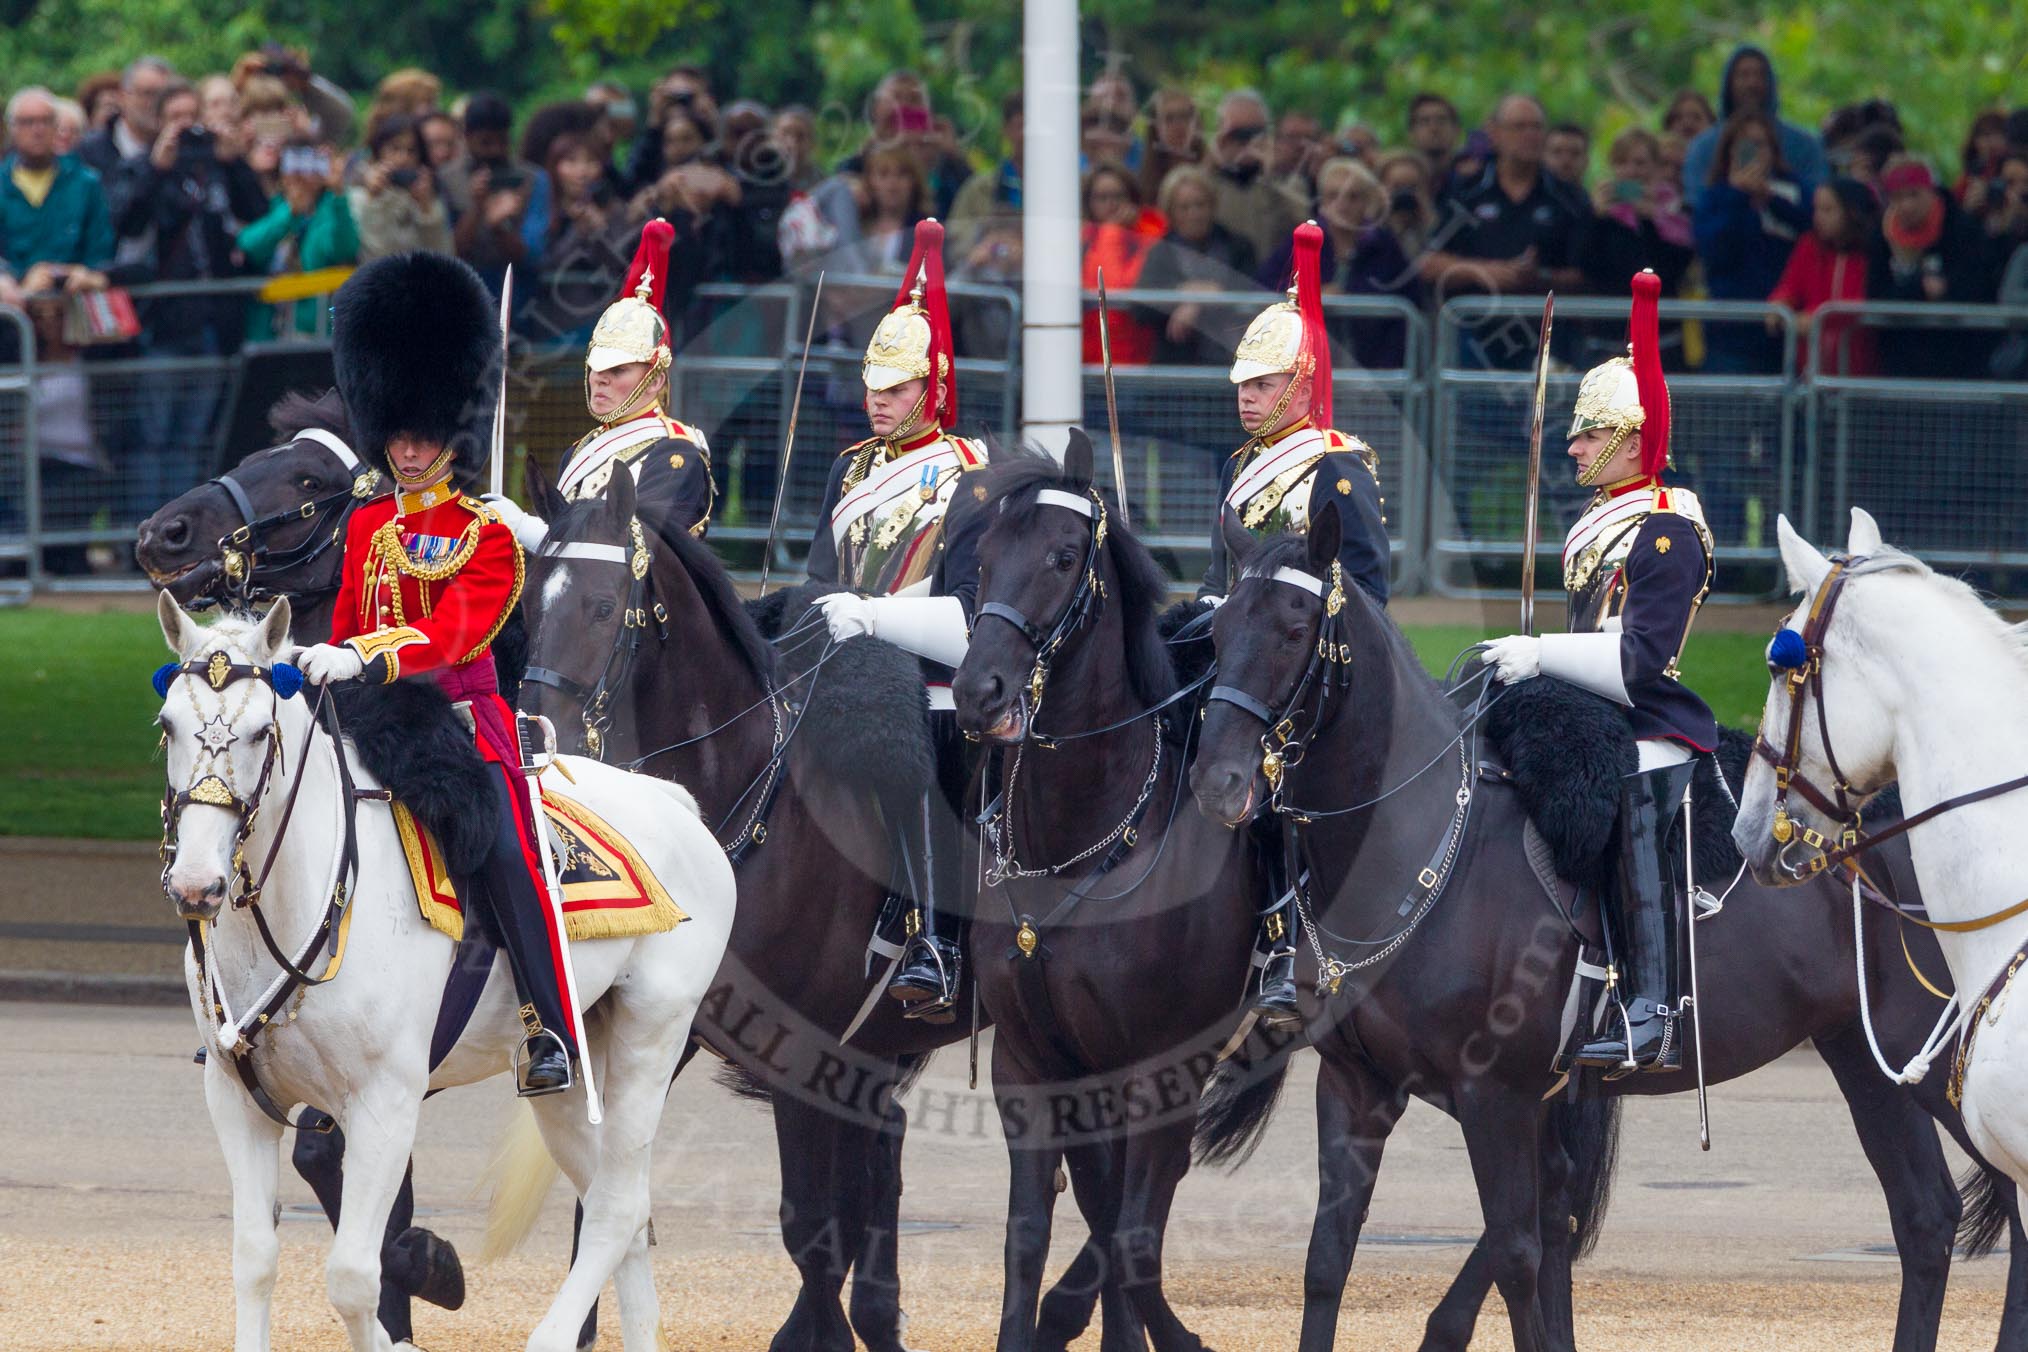 The Colonel's Review 2016.
Horse Guards Parade, Westminster,
London,

United Kingdom,
on 04 June 2016 at 11:04, image #200